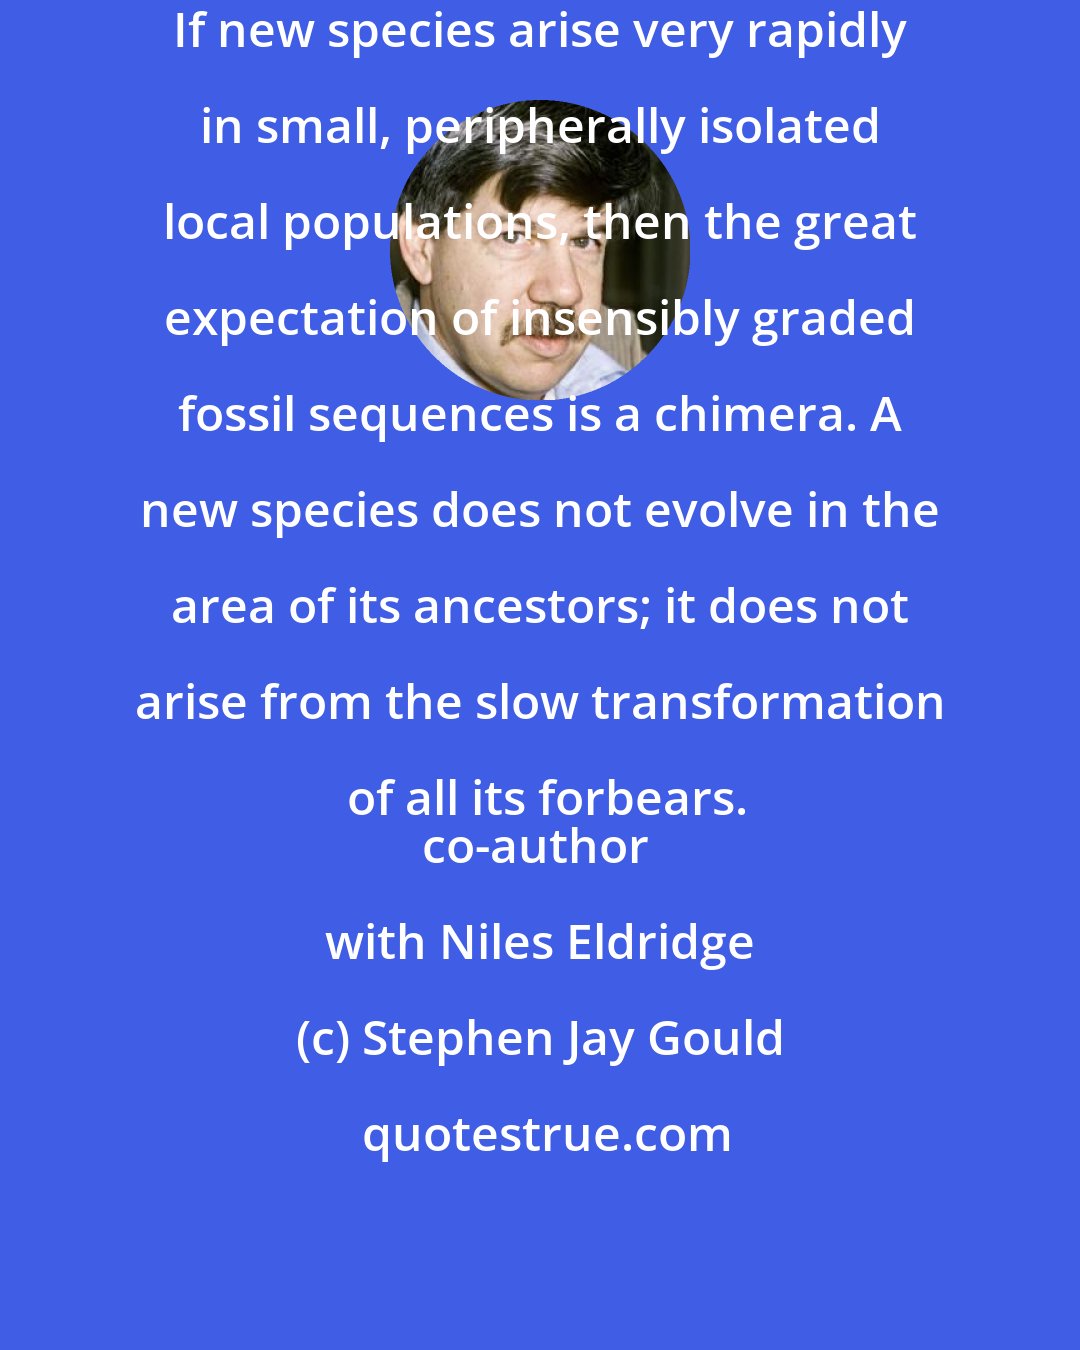 Stephen Jay Gould: If new species arise very rapidly in small, peripherally isolated local populations, then the great expectation of insensibly graded fossil sequences is a chimera. A new species does not evolve in the area of its ancestors; it does not arise from the slow transformation of all its forbears.
co-author with Niles Eldridge